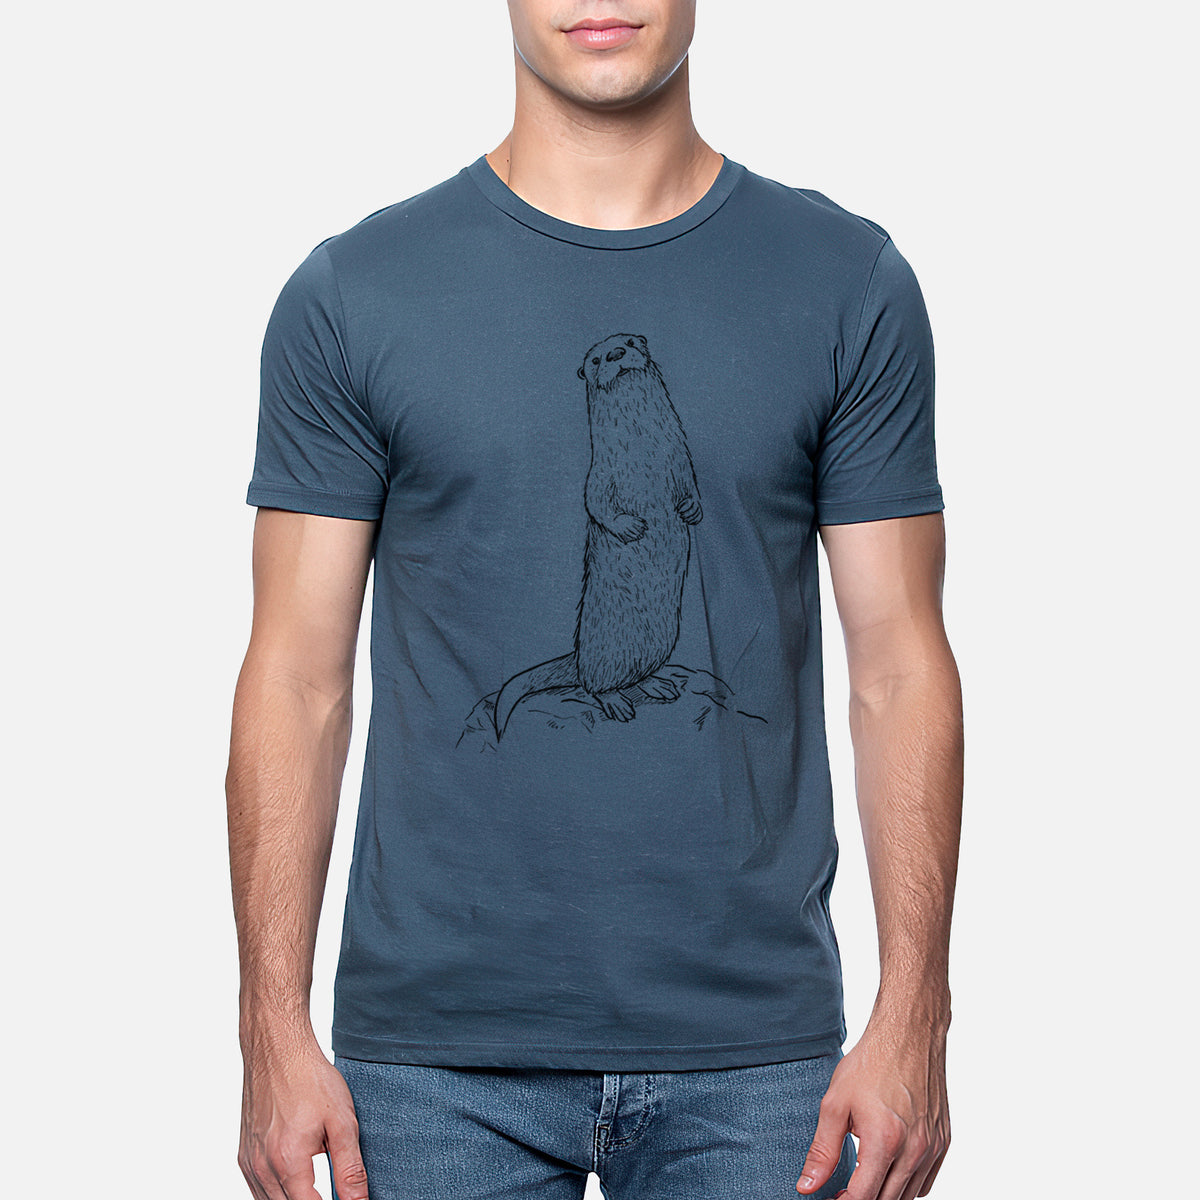 North American River Otter - Lontra canadensis - Unisex Crewneck - Made in USA - 100% Organic Cotton